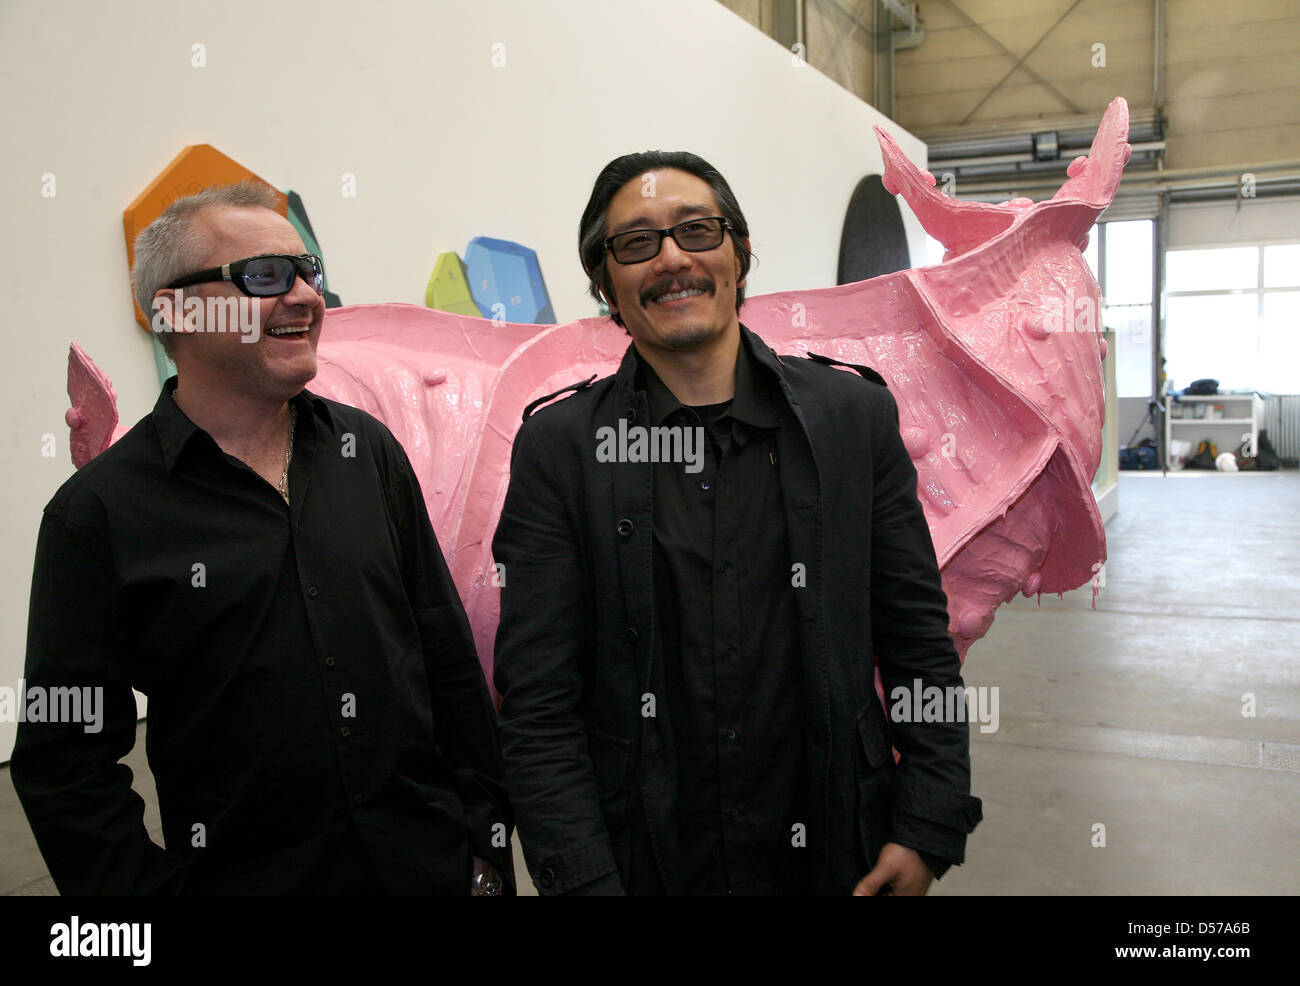 British artist Damien Hirst (L) and US American artist Michael Joo stand next to their works of art at the art gallery Haunch of Venison in Berlin, Germany, 30 April 2010. The exhibition 'Have You Ever Really Looked at the Sun?' is a collaboration between Hirst and Joo which opens on 01 May and can be visited until 14 August 2010. Photo: STEPHANIE PILICK Stock Photo